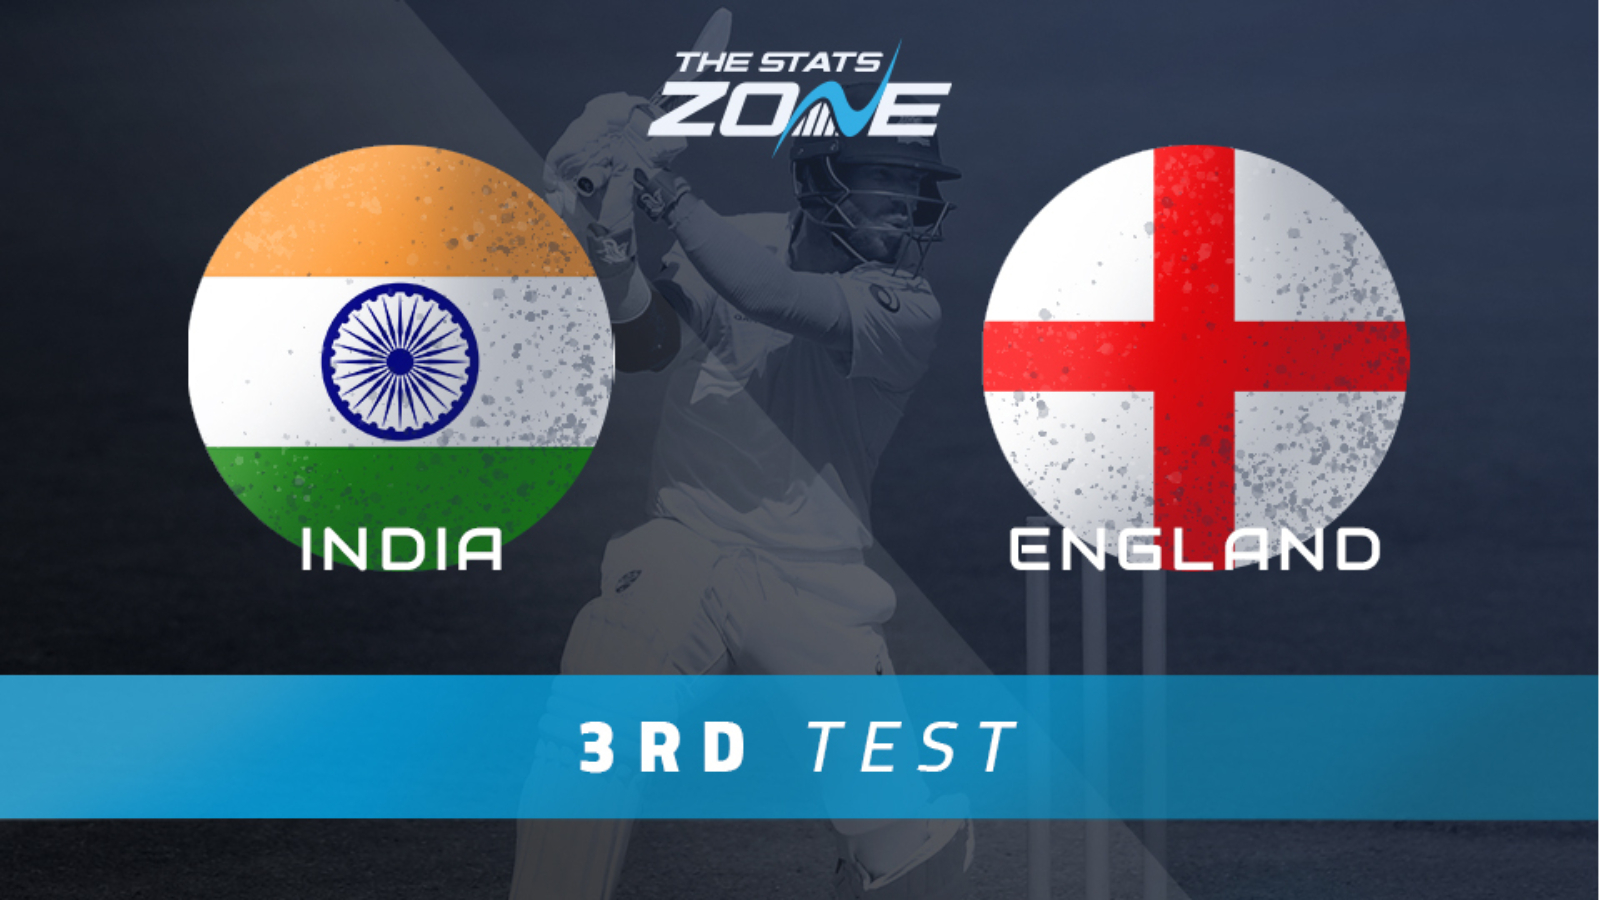 India Vs England 3rd Test Match Preview Prediction The Stats Zone